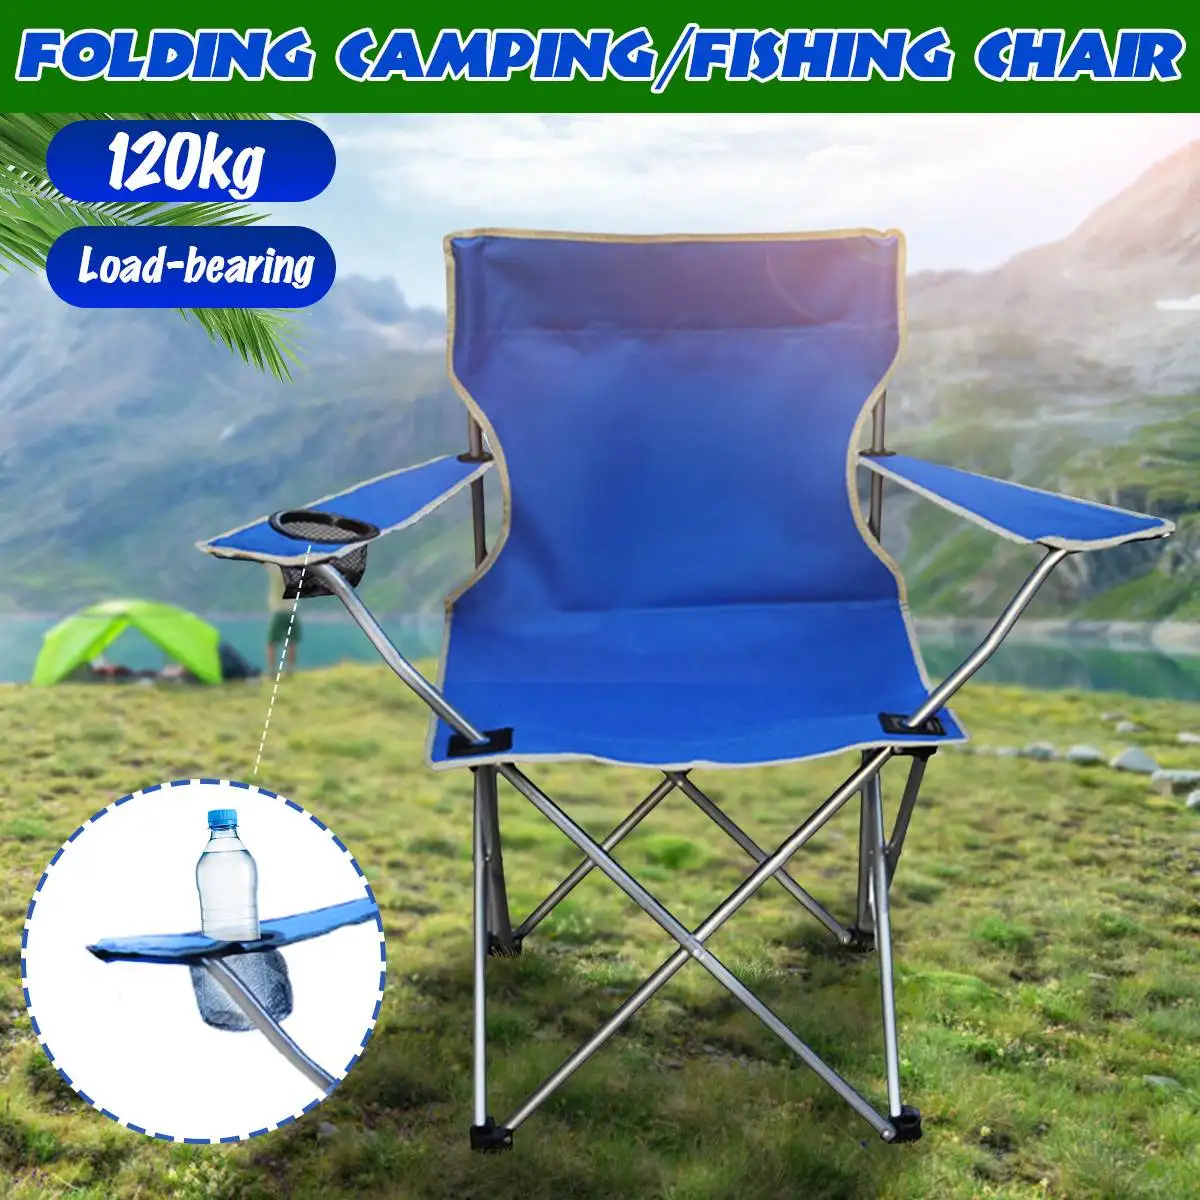 Light Folding Chair Camping Fishing Seat Portable Beach Garden Outdoor Camping Leisure Picnic Beach Chair Tool enlarge